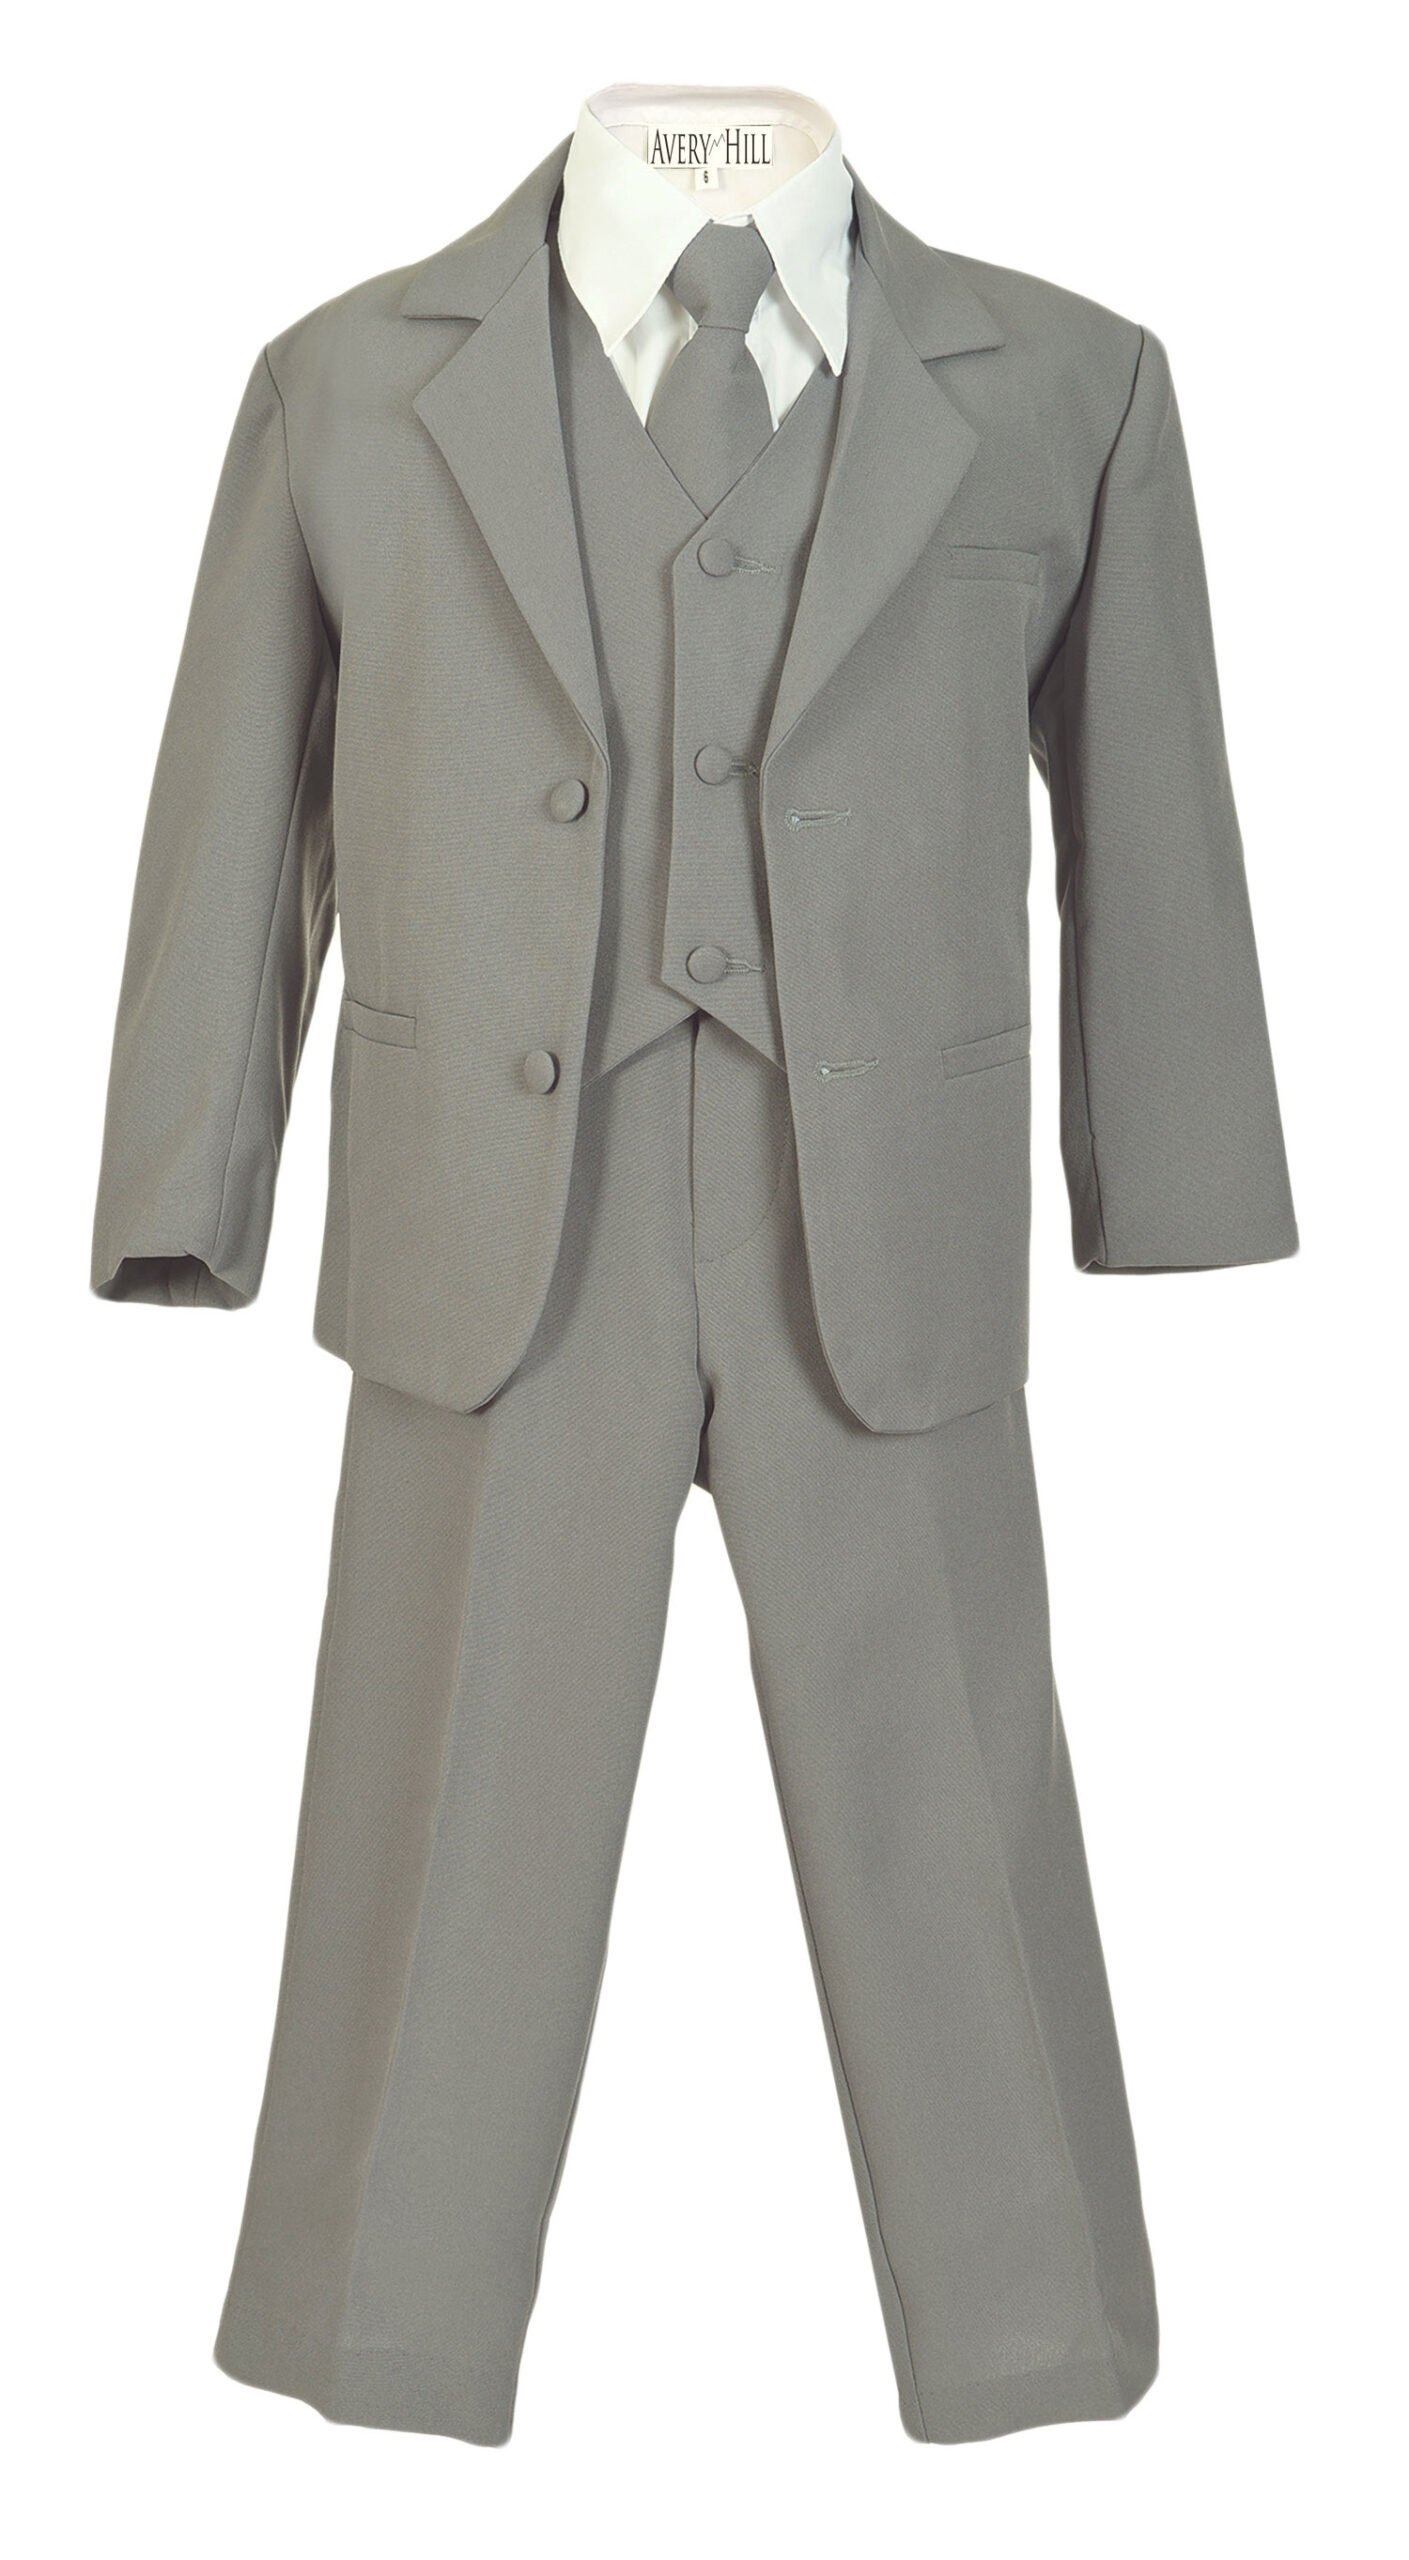 Boys Formal 5 Piece Suit with Shirt and Vest - Light Gray - Little ...